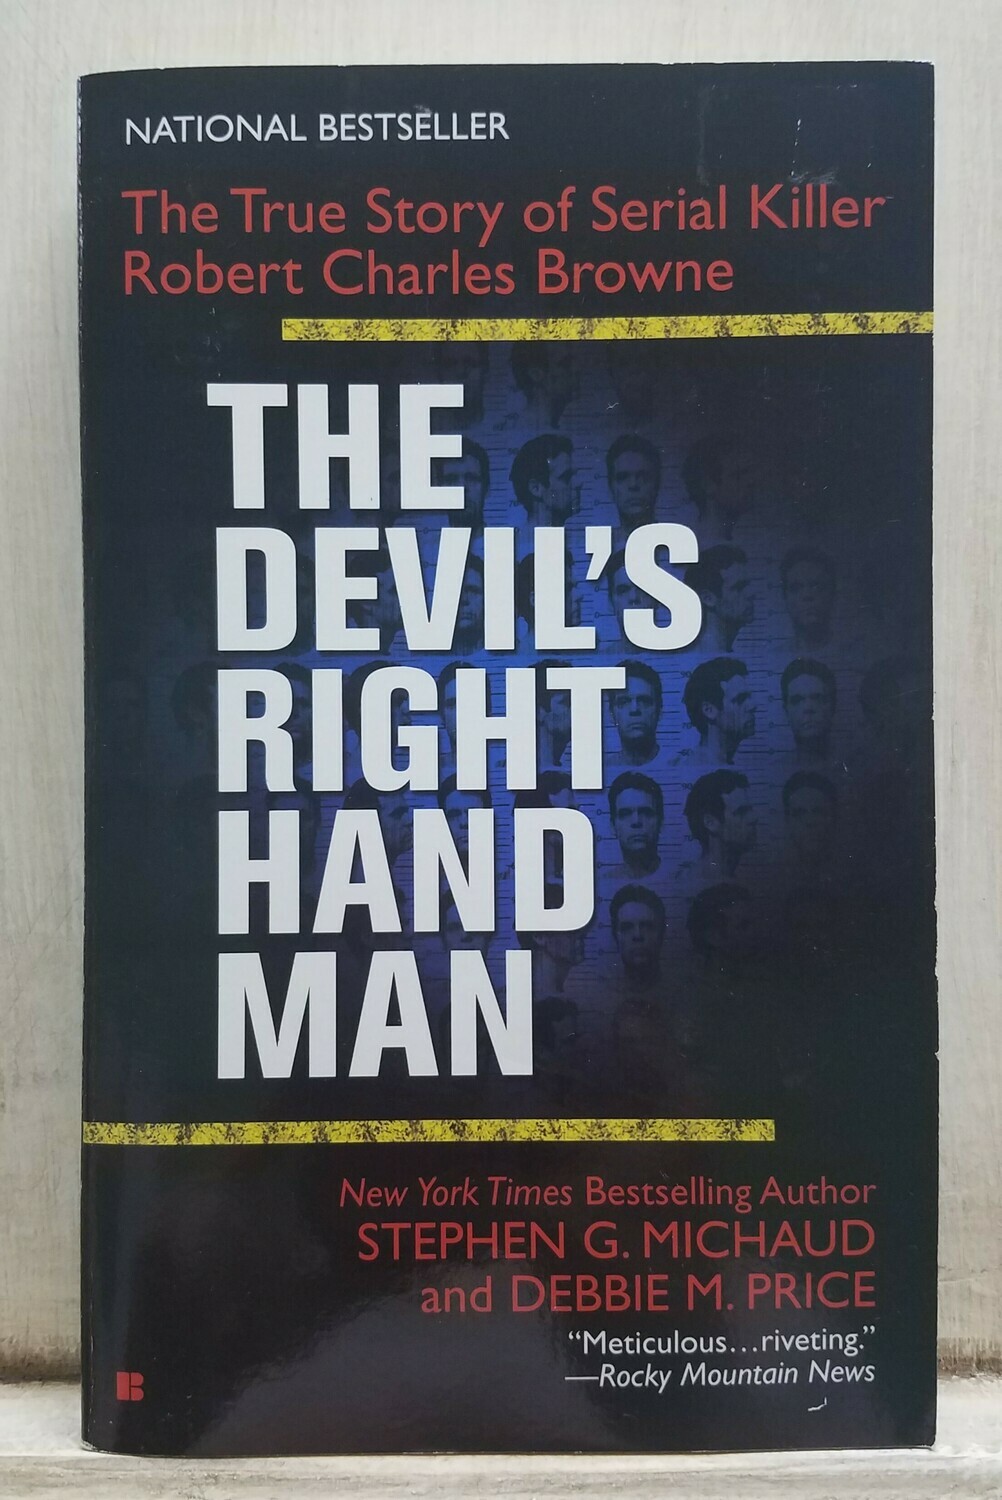 The Devil's Right Hand Man by Stephen G. Michaud and Debbie M. Price